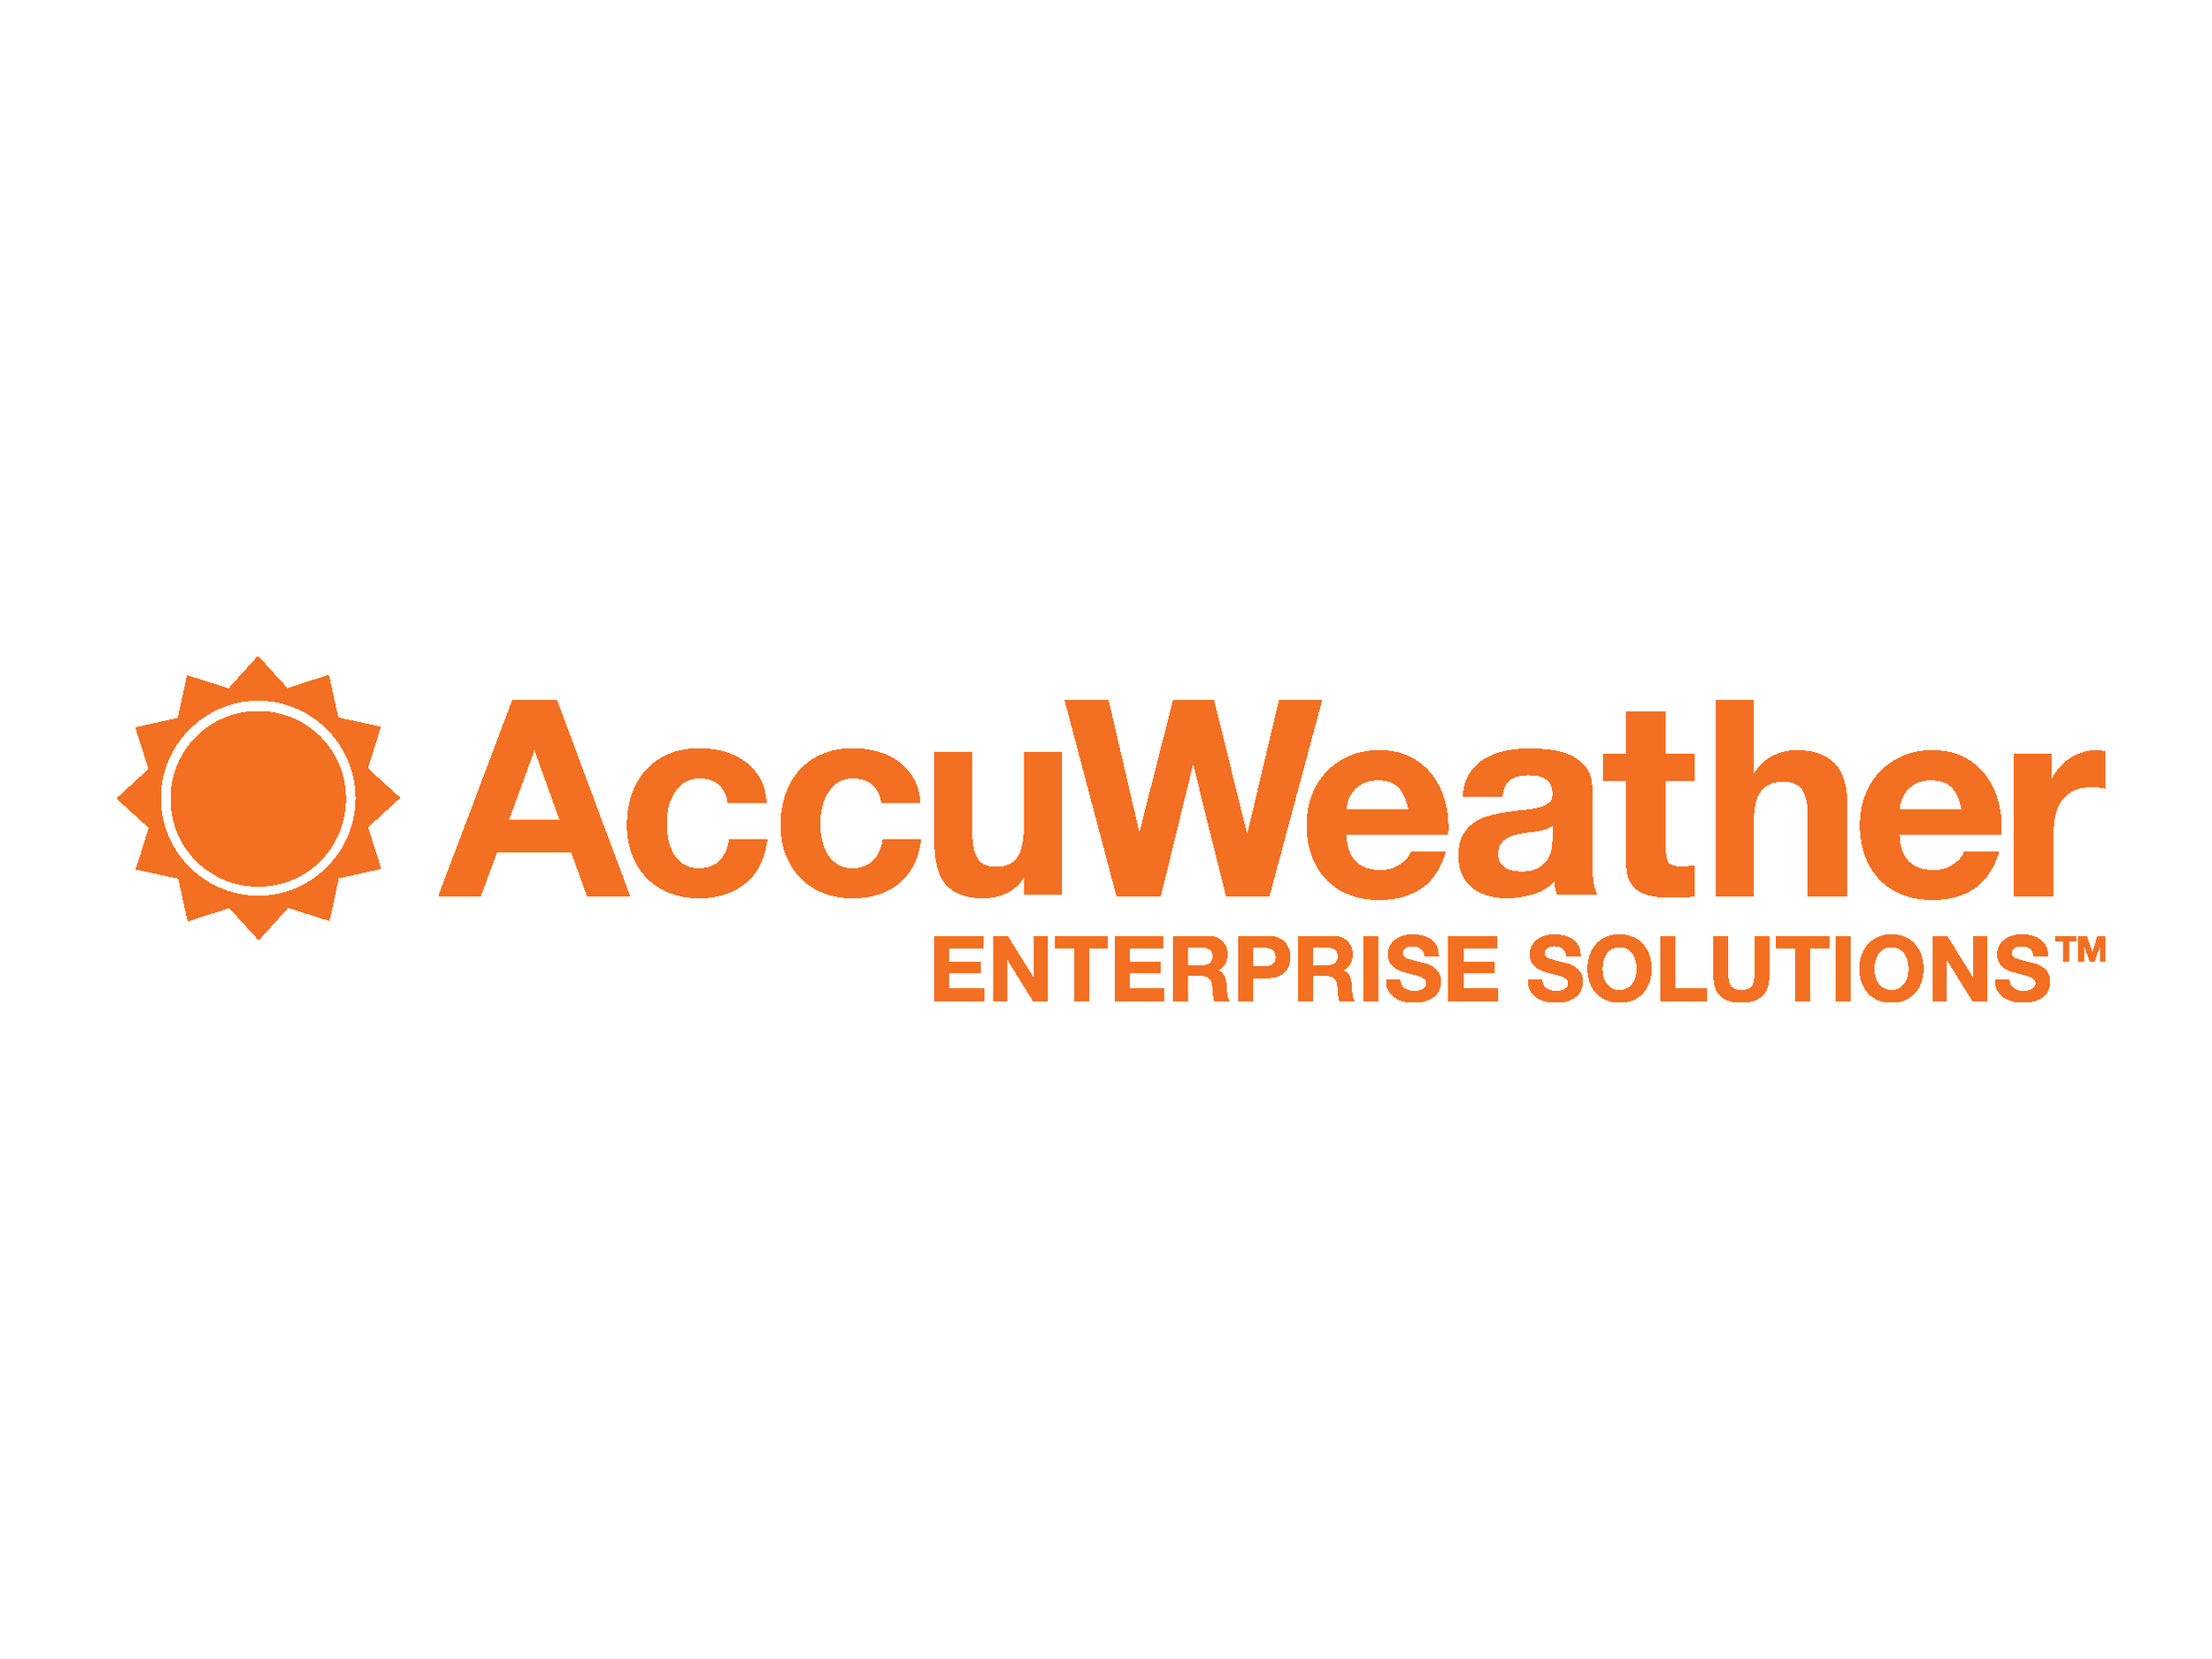 AccuWeather Enterprise Solutions Logo 2019.png